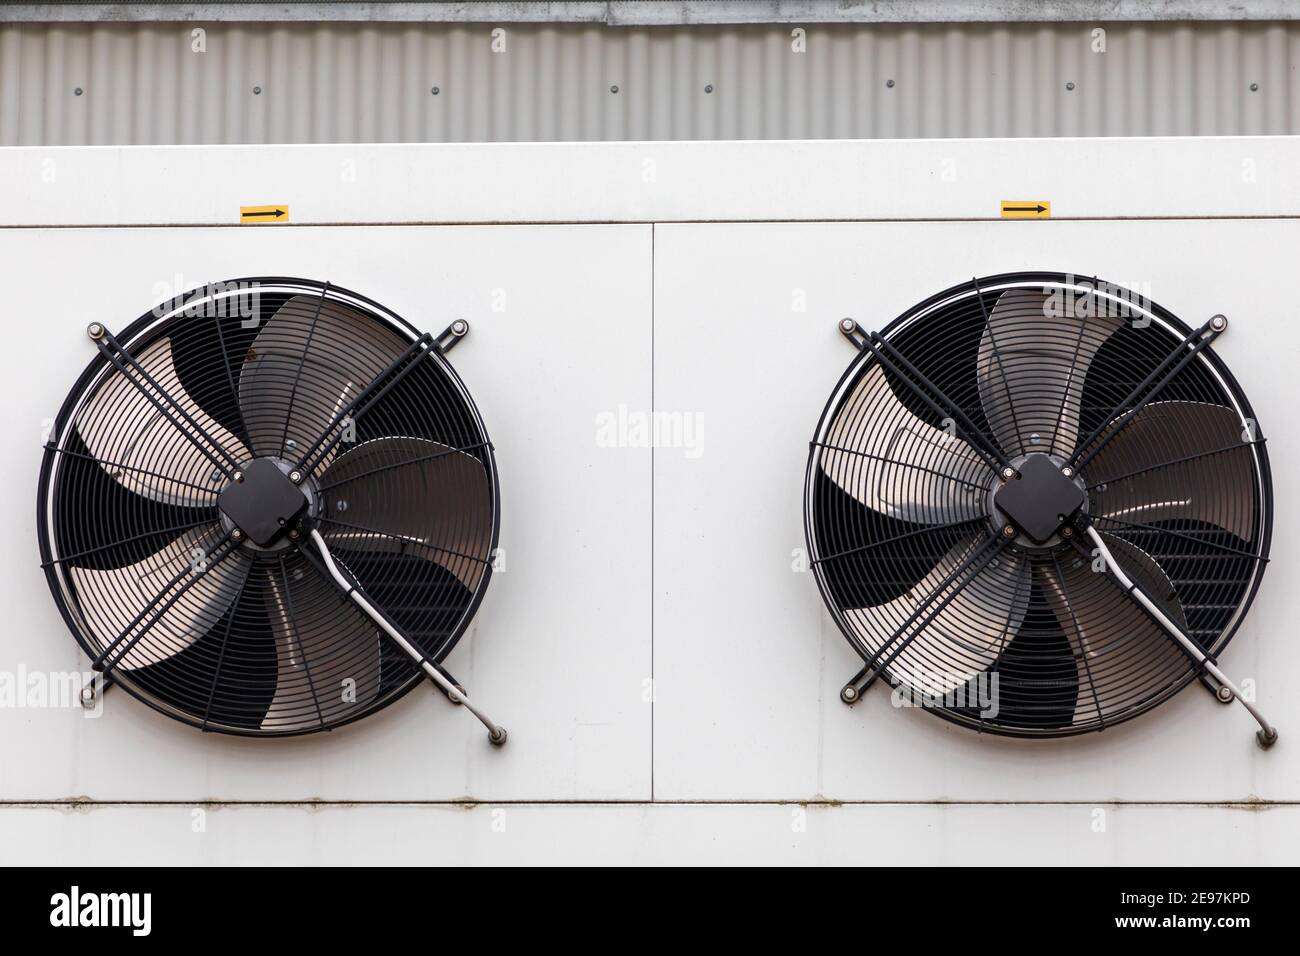 Ventilator of an air conditioner Stock Photo - Alamy